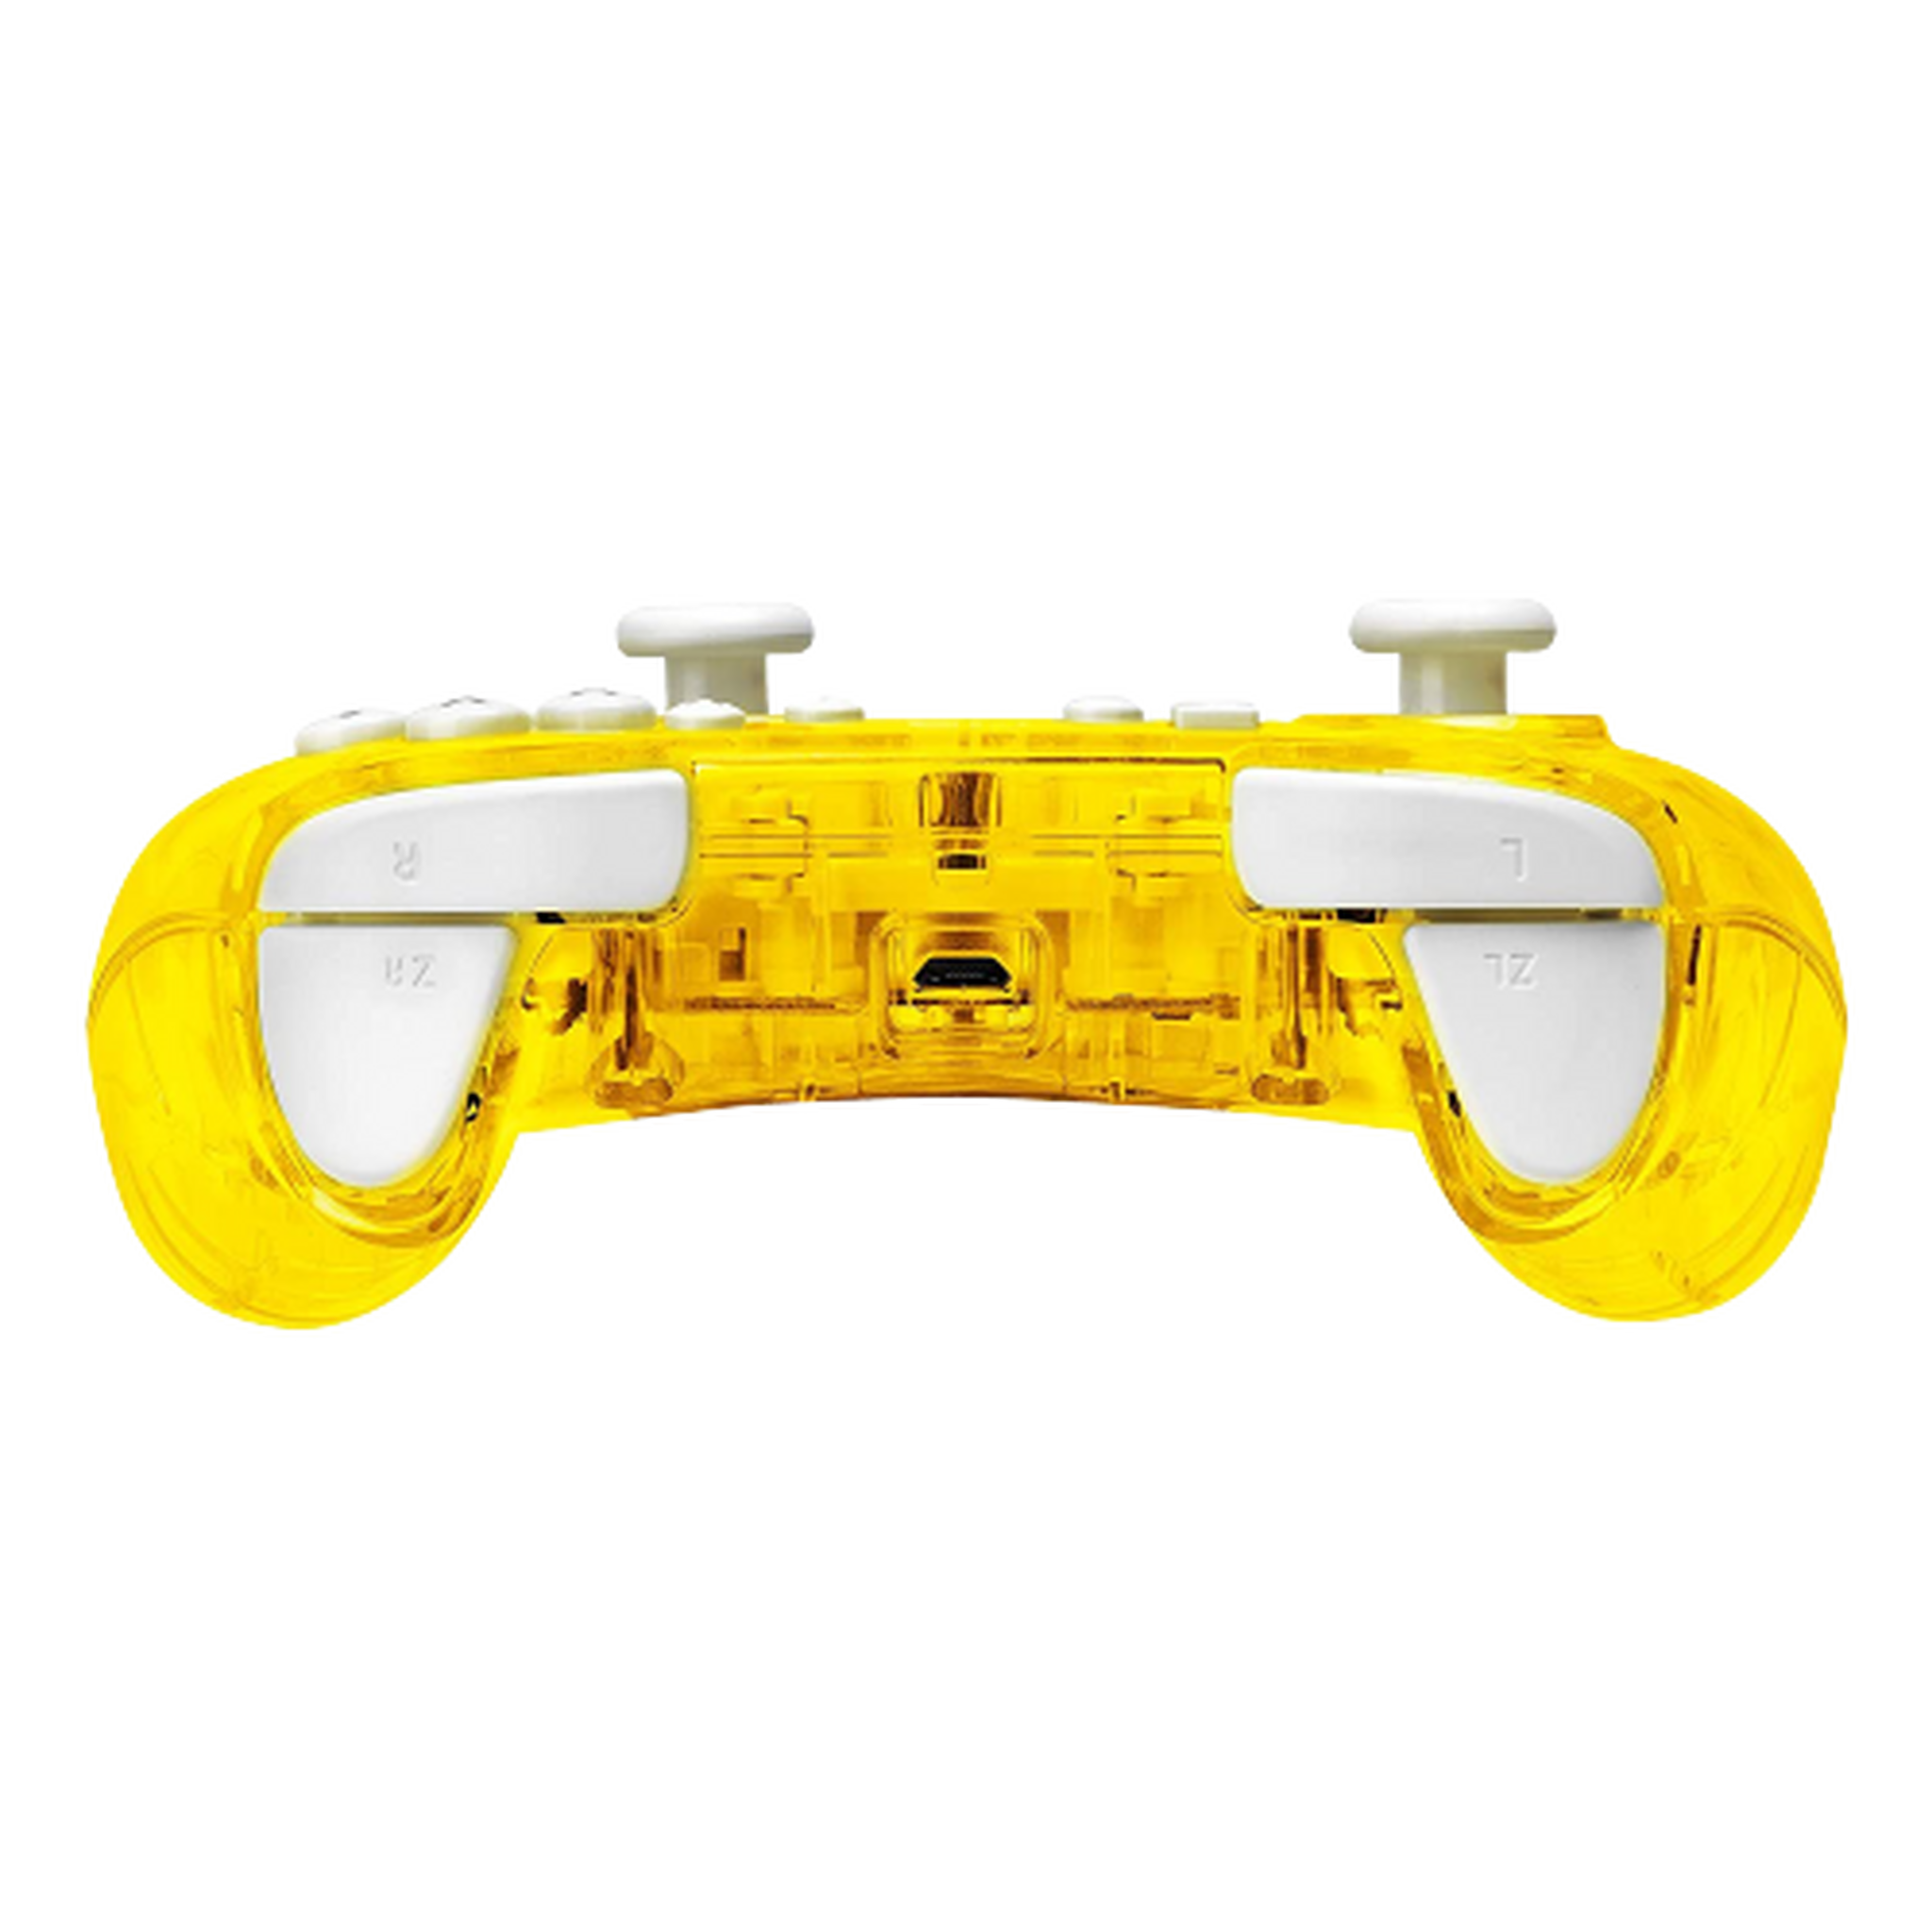 PDP Nintendo Switch Rock Candy Wired Controller - Pineapple